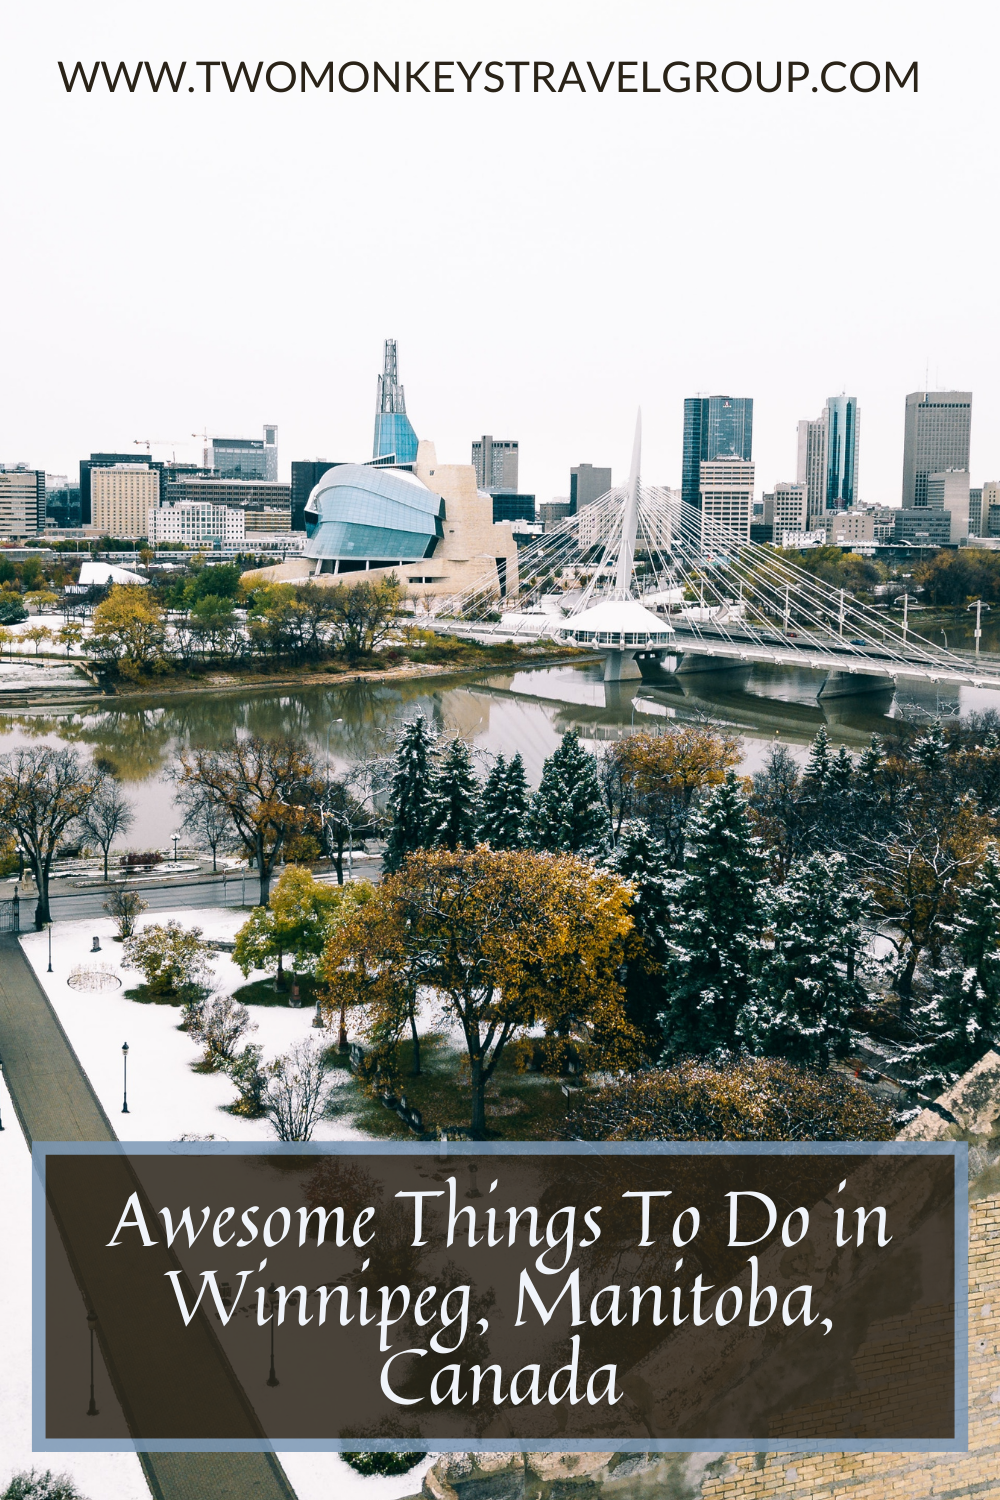 7 Awesome Things To Do in Winnipeg, Manitoba, Canada9